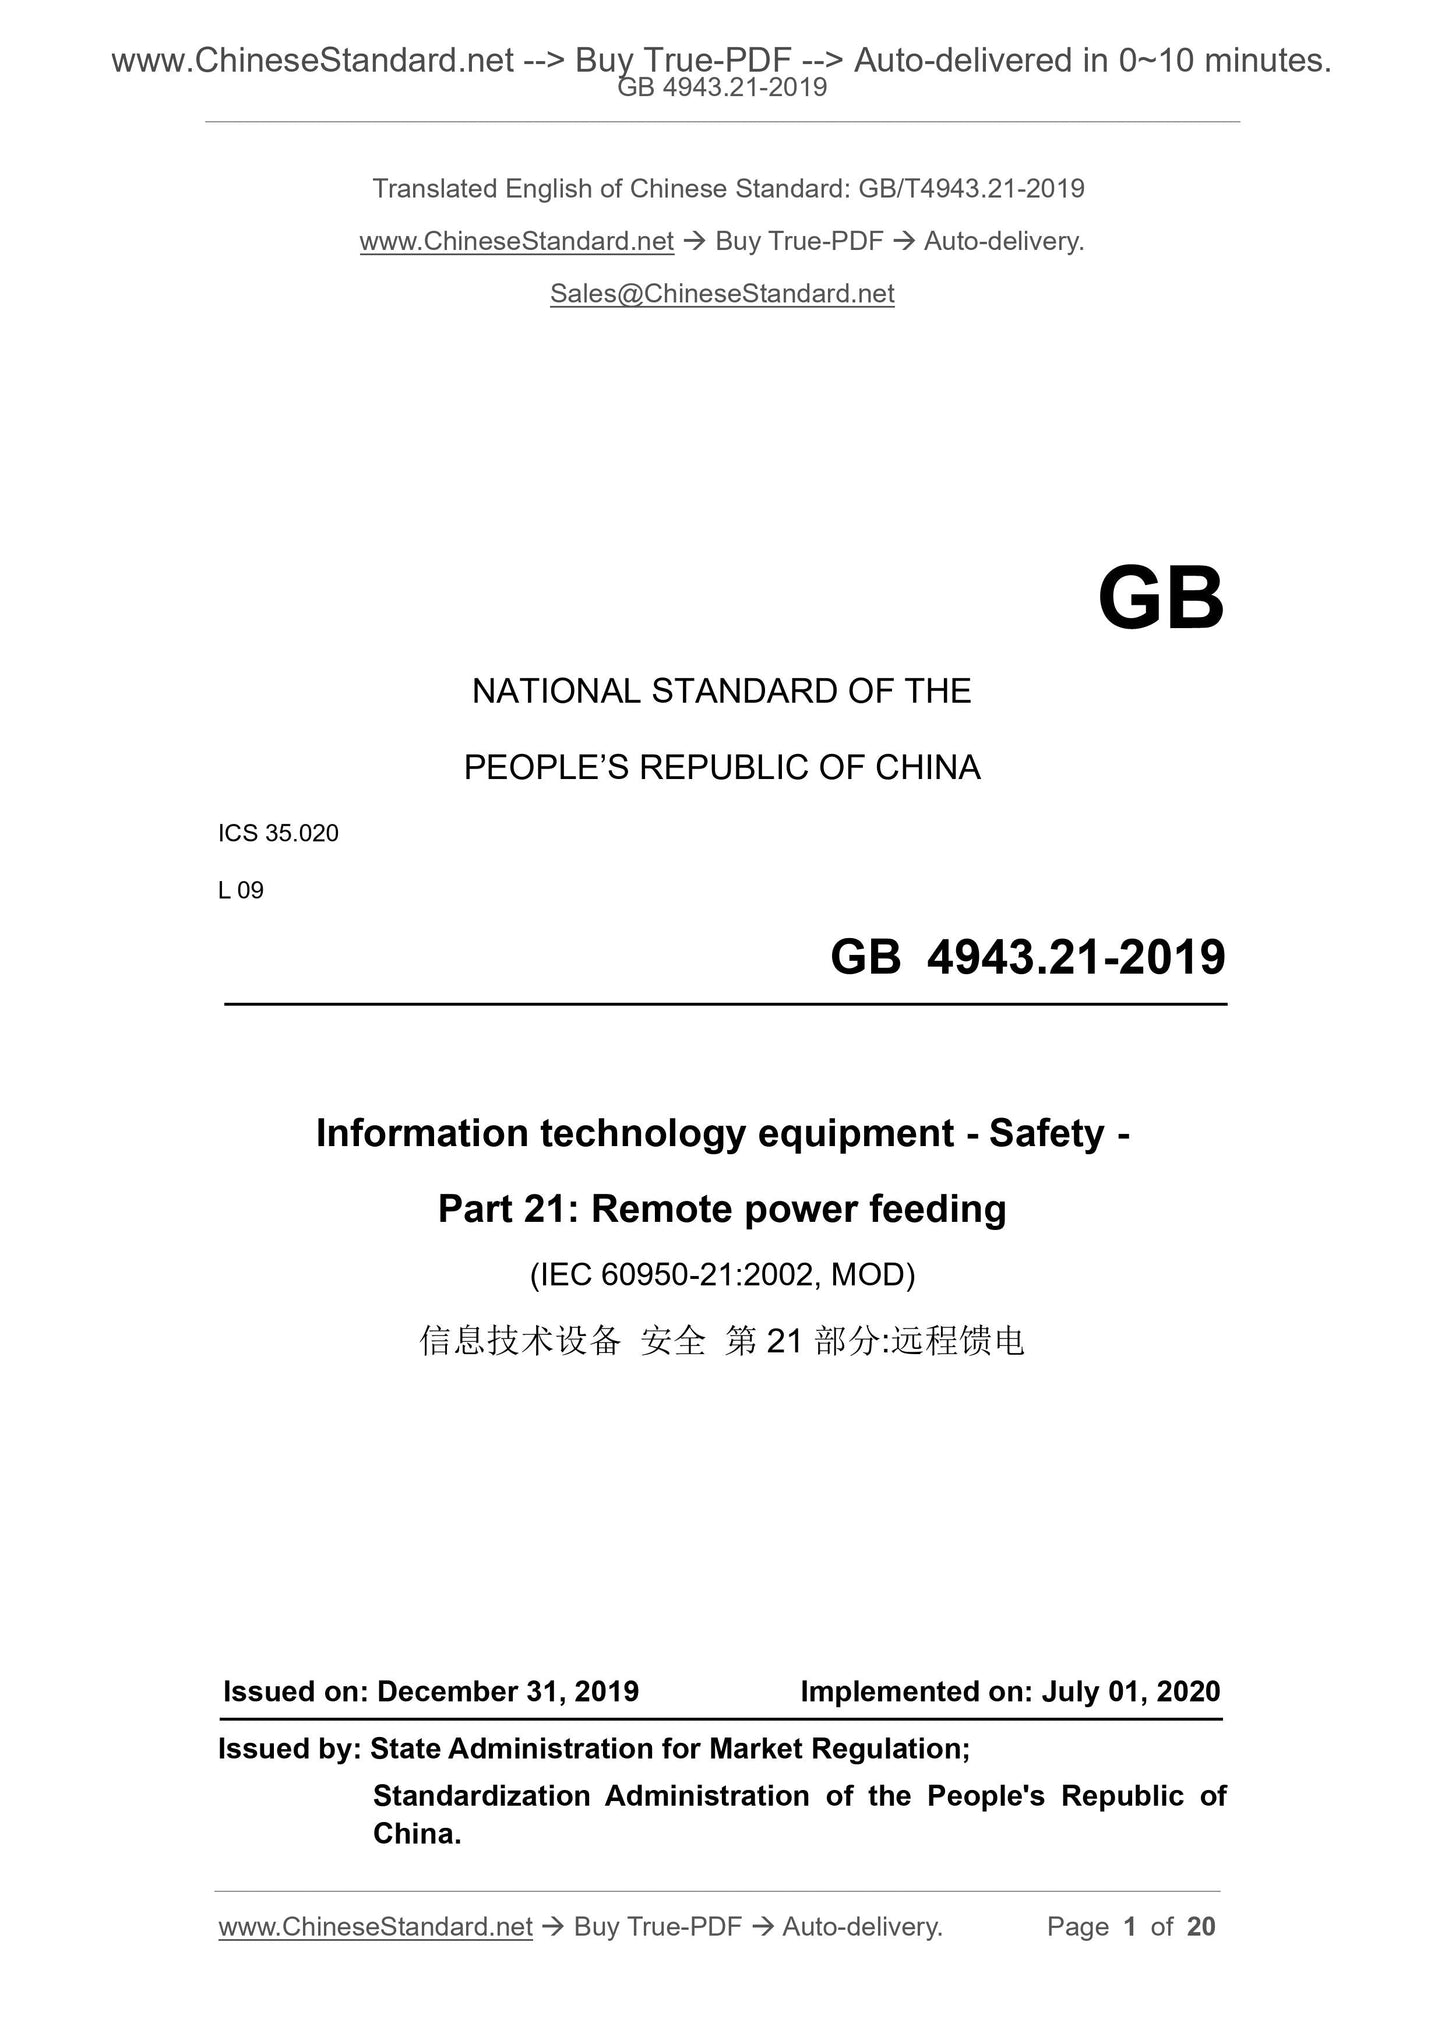 GB 4943.21-2019 Page 1